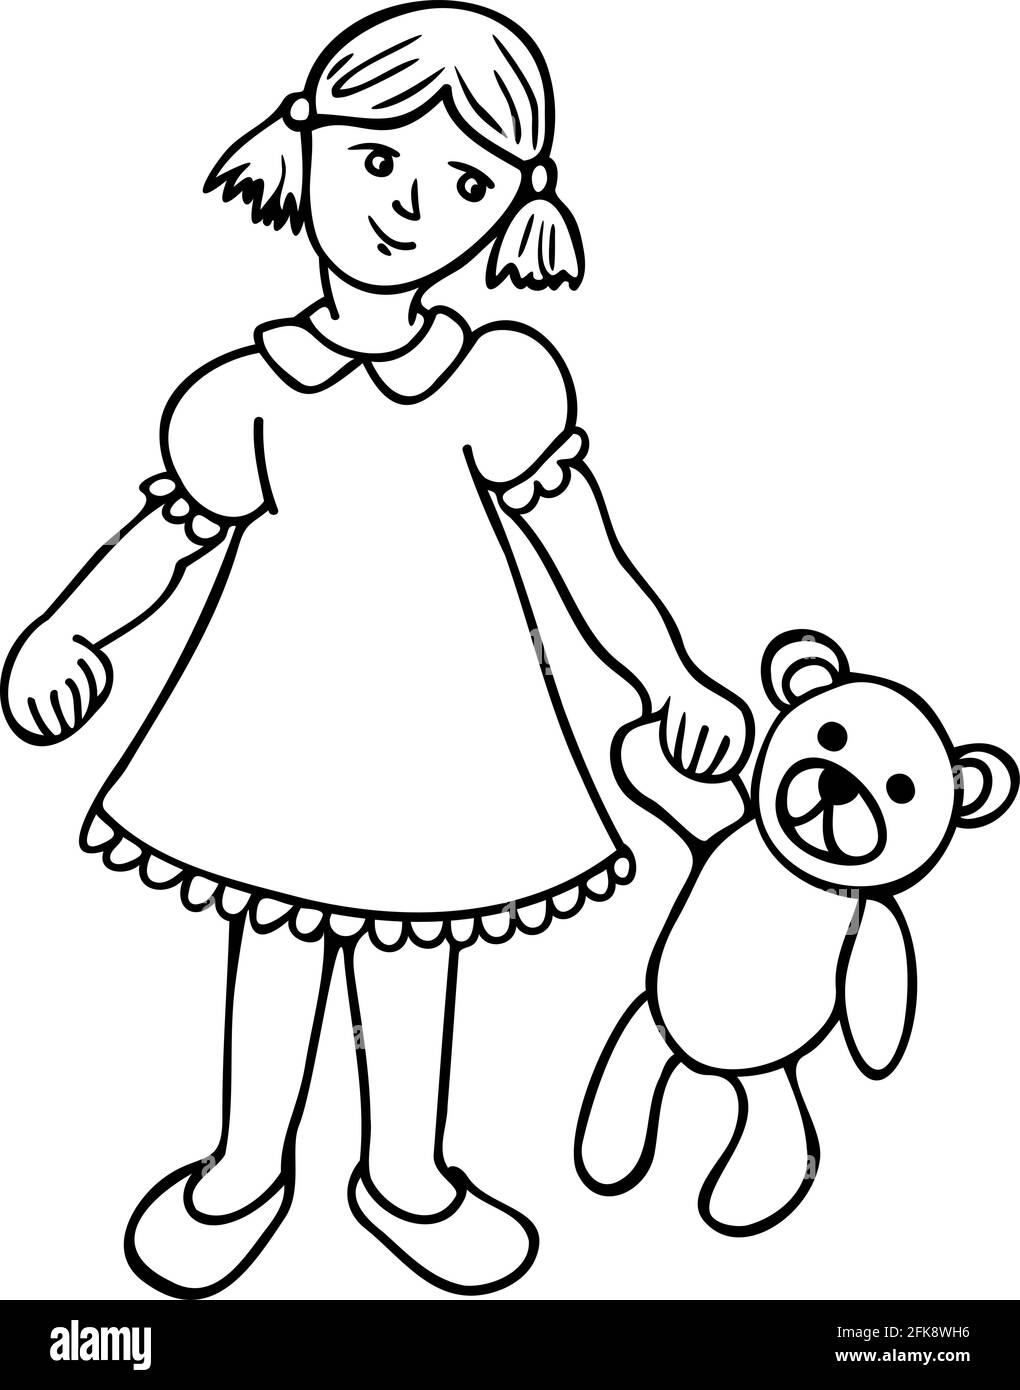 Vector black and white illustration of little girl with toy bear in hand. Girl with a teddy bear. Design for coloring book. Stock Vector